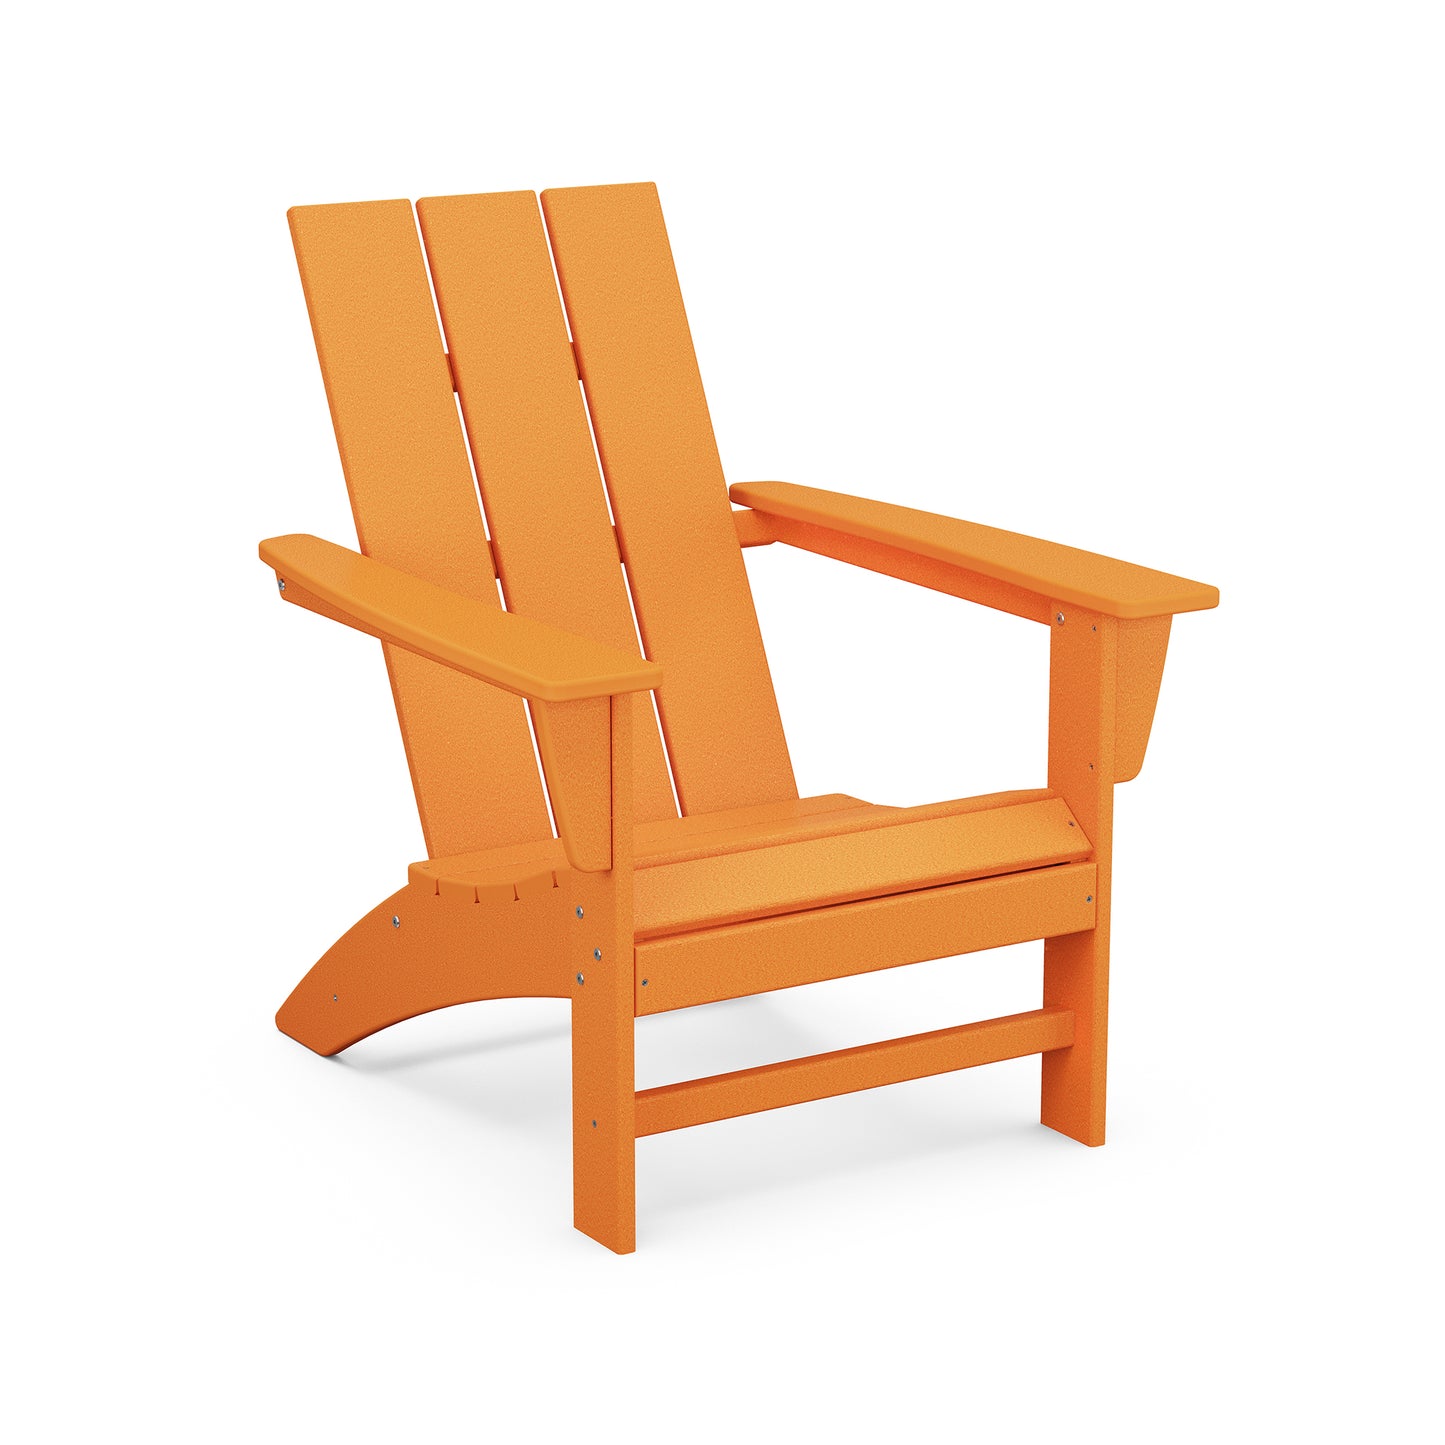 An orange POLYWOOD Modern Adirondack chair, featuring a slanted back and wide armrests, isolated on a white background.